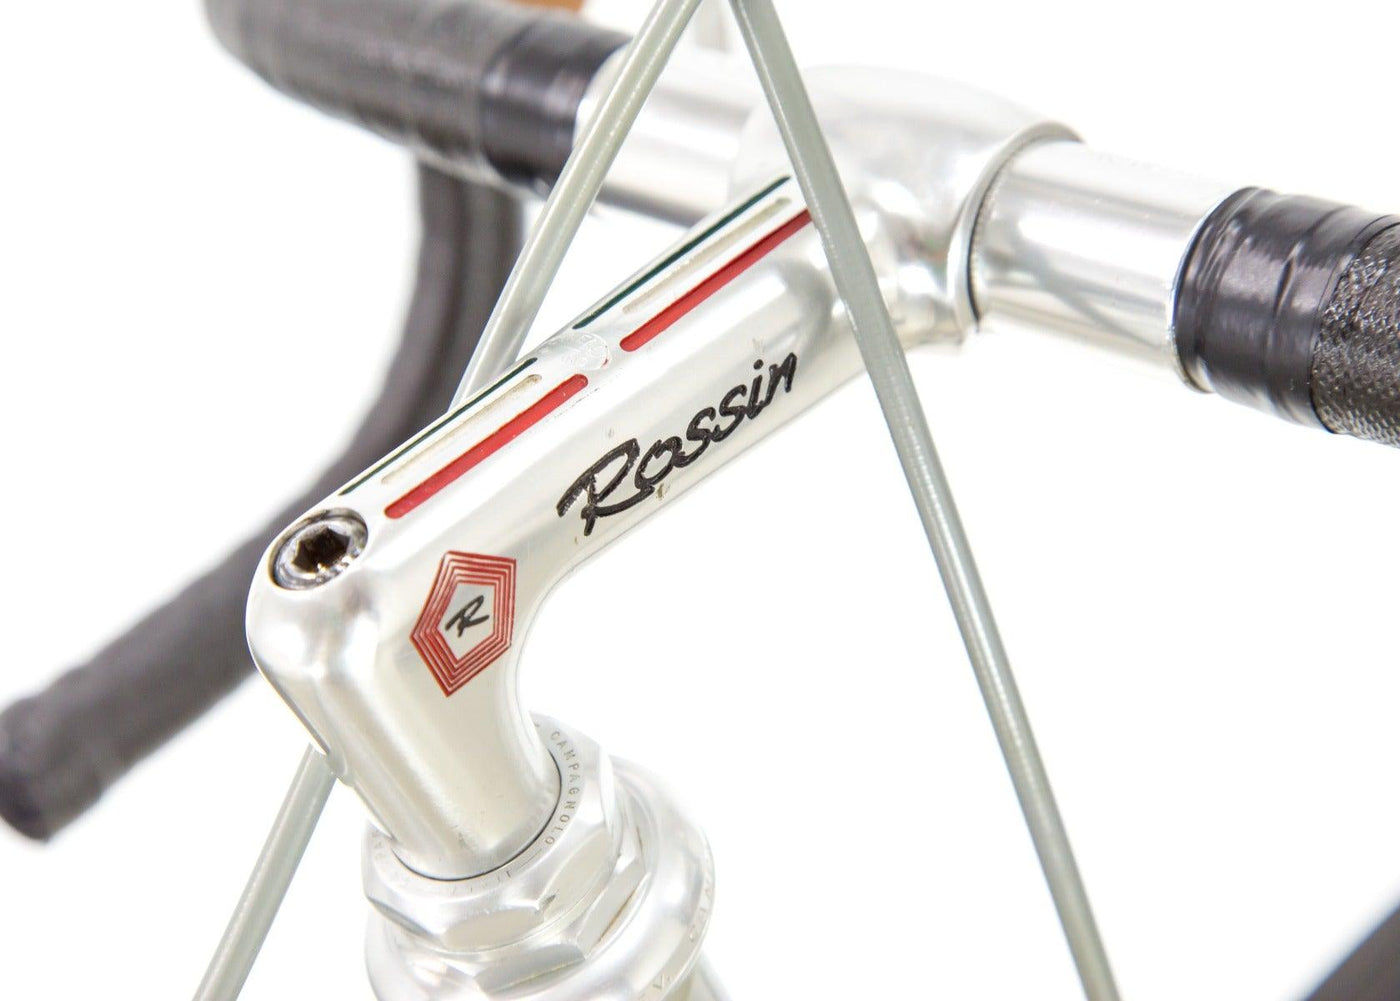 Rossin Super Record Classic Mint Road Bicycle 1976 - Steel Vintage Bikes